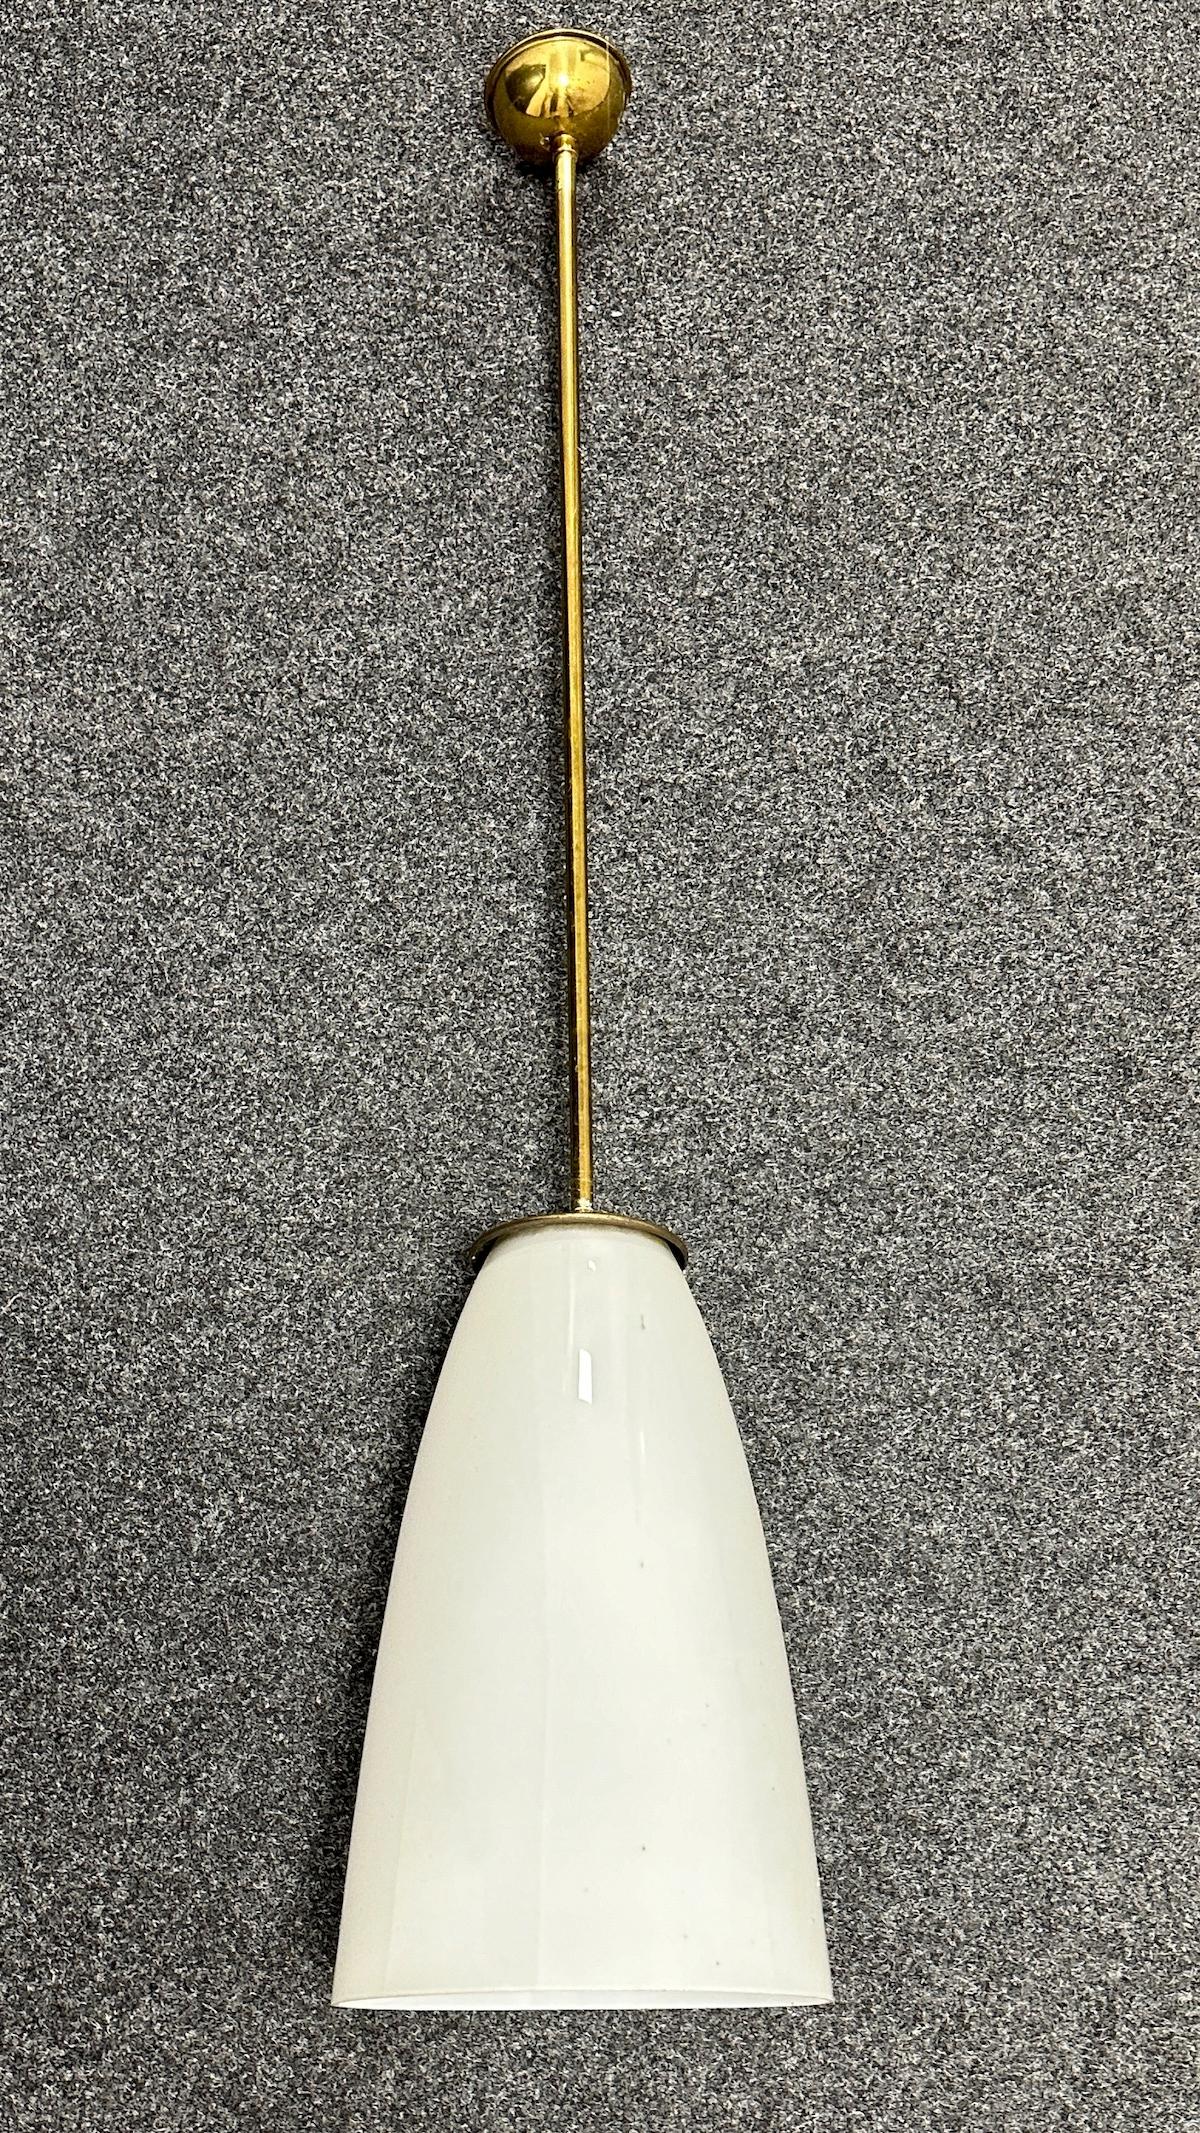 This Art Deco Bauhaus Style chandelier was made in the 1930s in Germany. It is made of a brass frame and a opaline glass shade. The Fixture requires an European E27 / 110 Volt Edison bulb, up to 100 watts. The Glass part is approx. 15.75